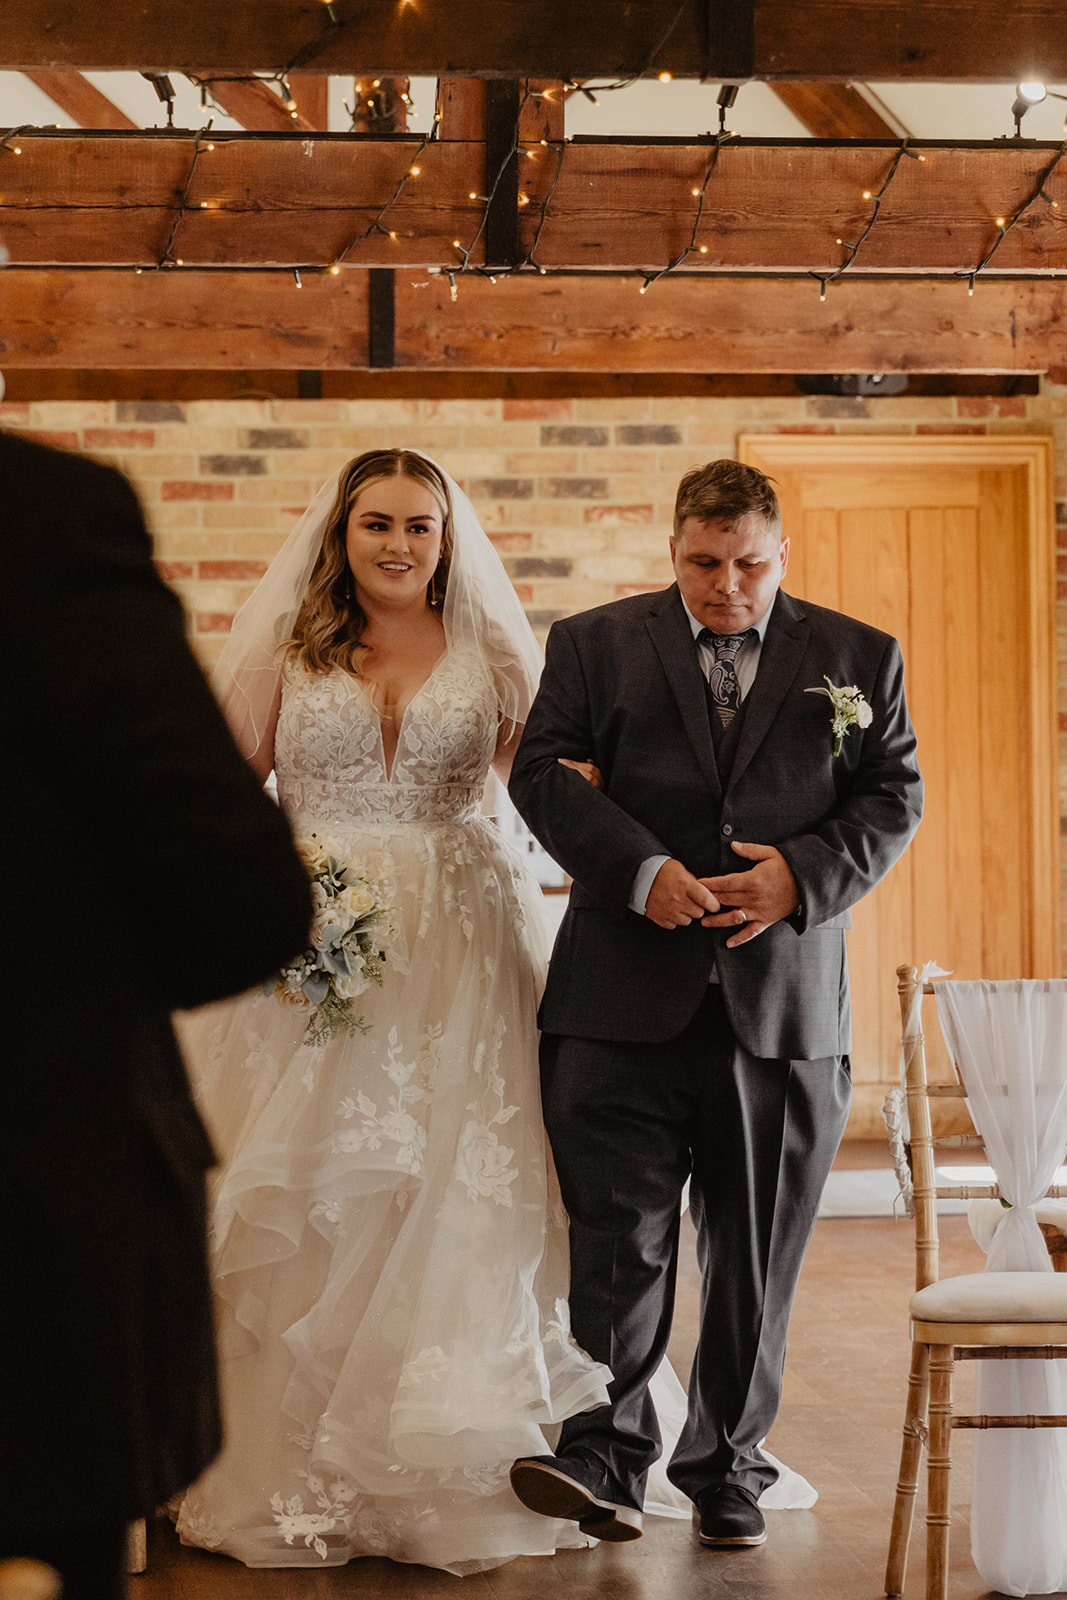 Bride being walked down the aisle at a Long Furlong Barn Wedding in Worthing, Sussex. By Olive Joy Photography.